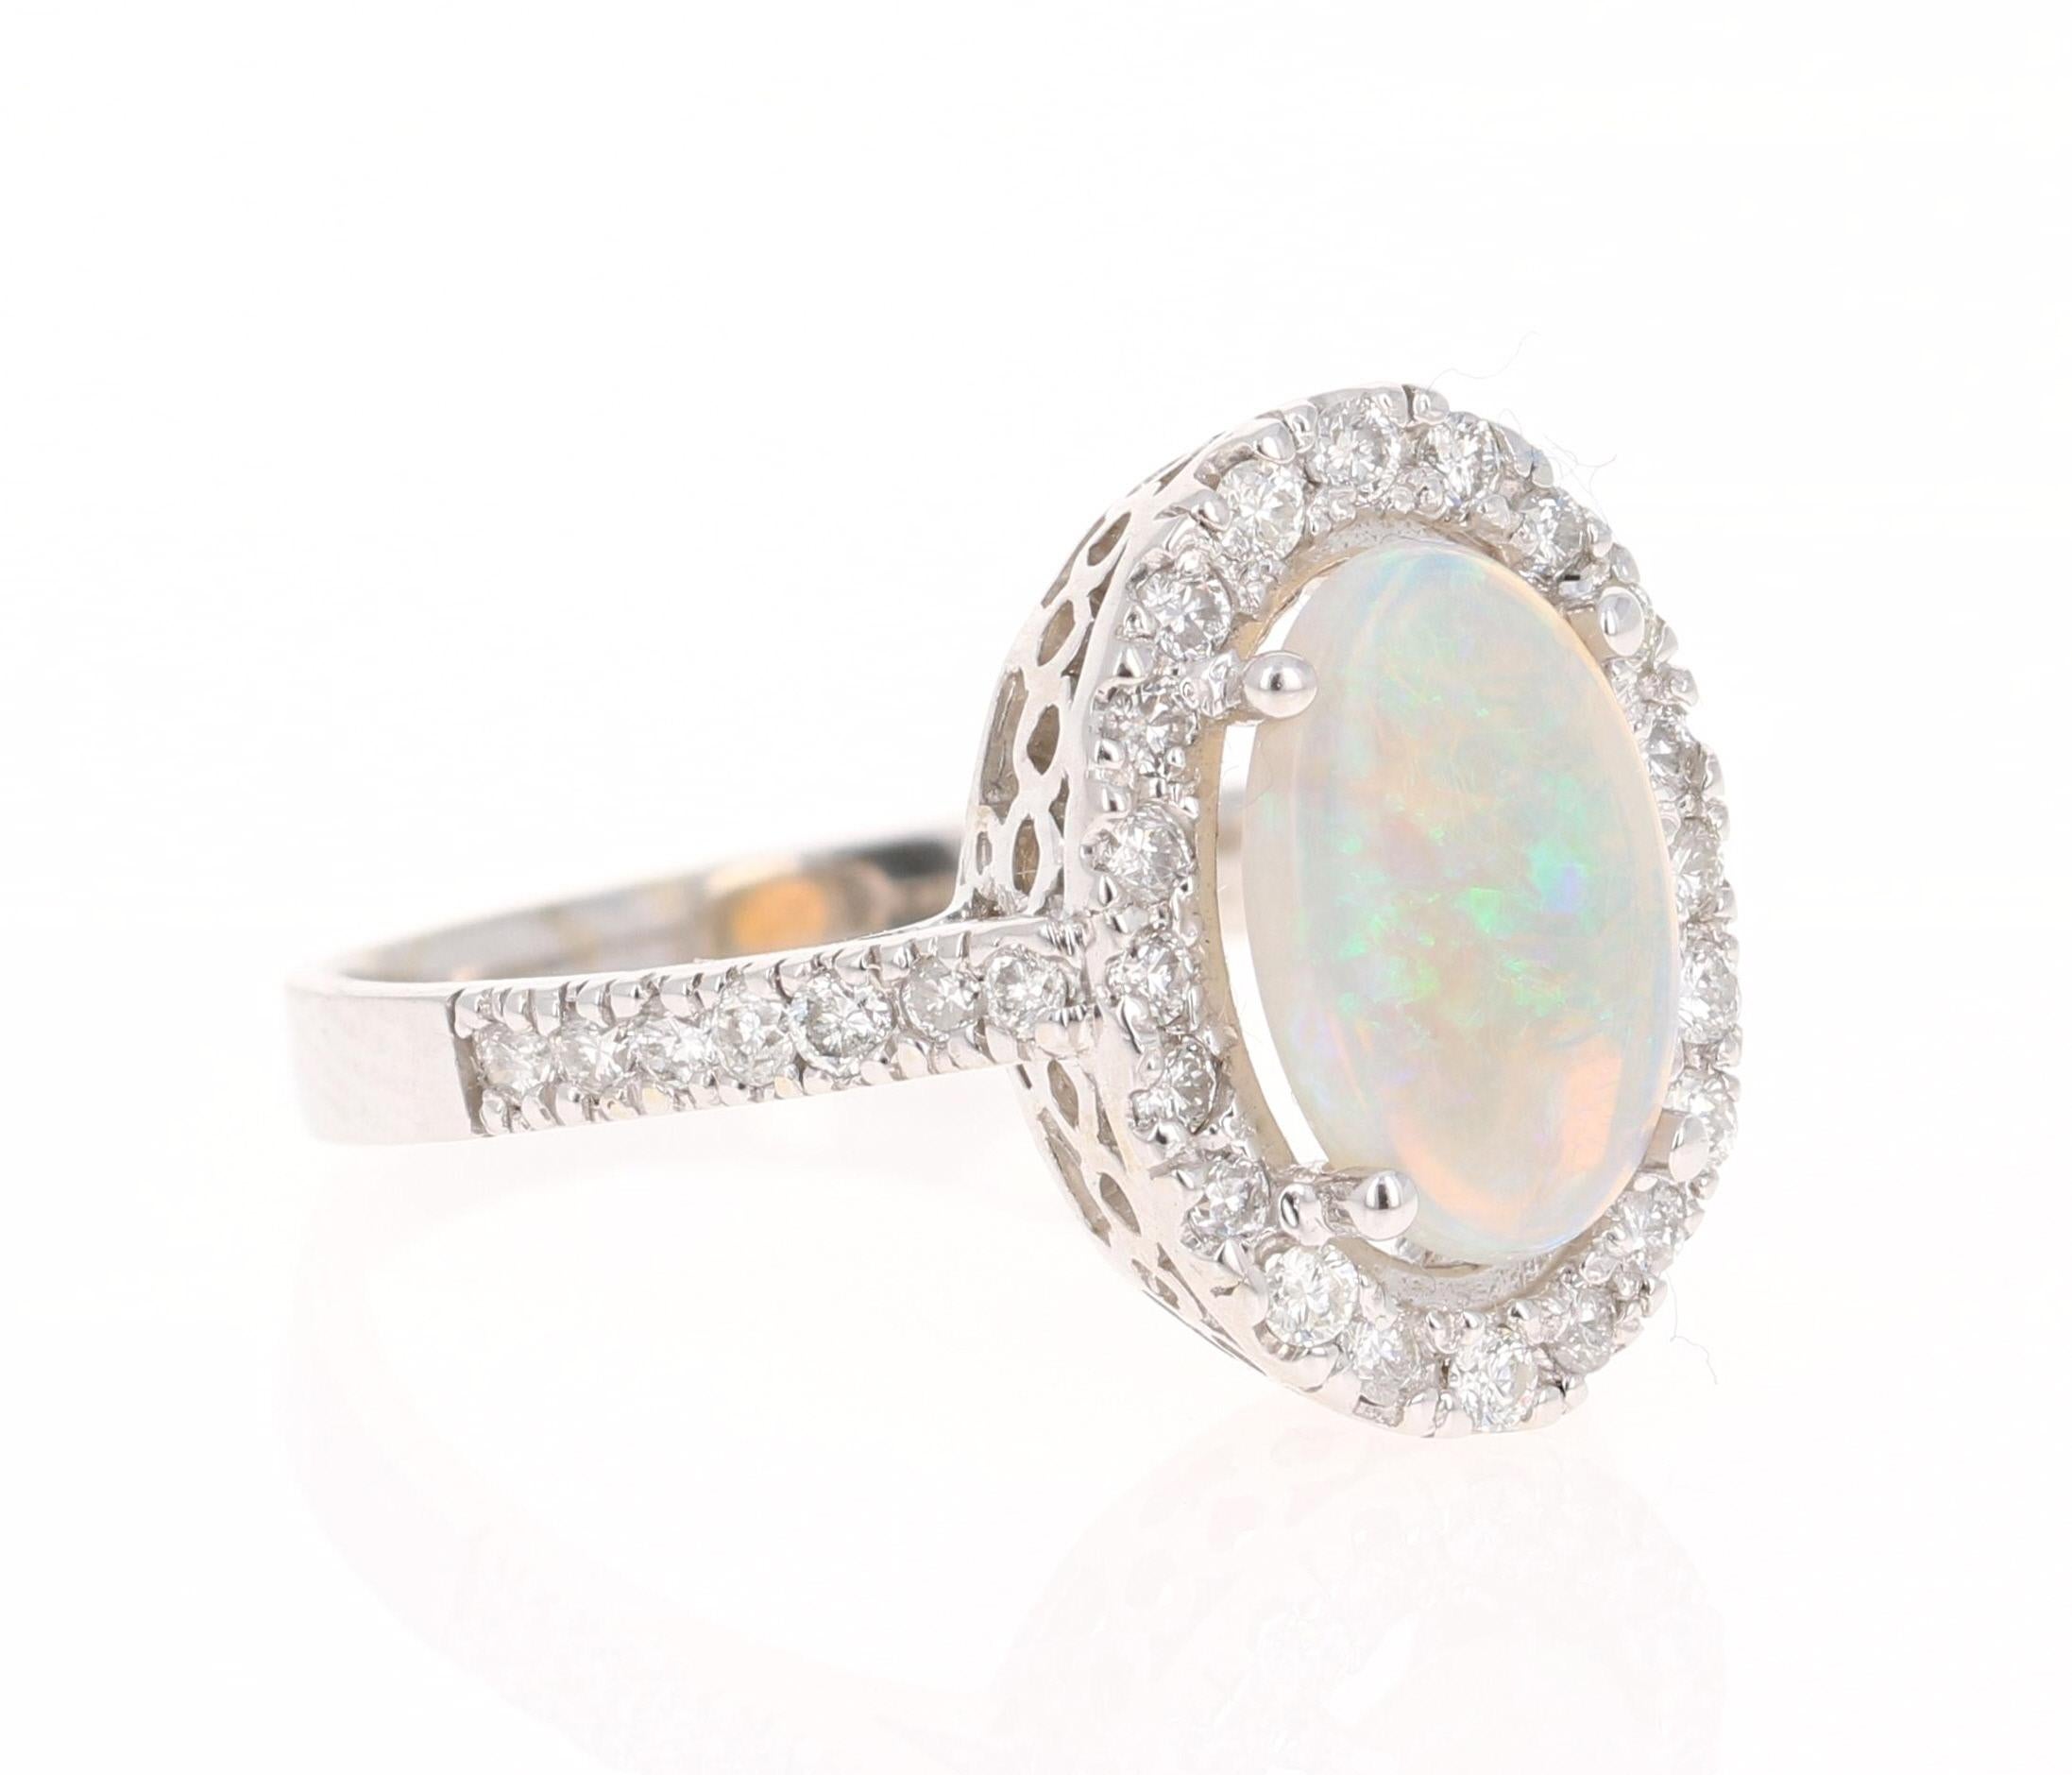 This ring has a cute and simple 1.49 Carat Opal and has 34 Round Cut Diamonds that weigh 0.52 Carats. (Clarity: VS, Color: H) The total carat weight of the ring is 2.01 Carats. 

The Opal measures at 11 mm x 7 mm and the face of the ring is 17 mm x